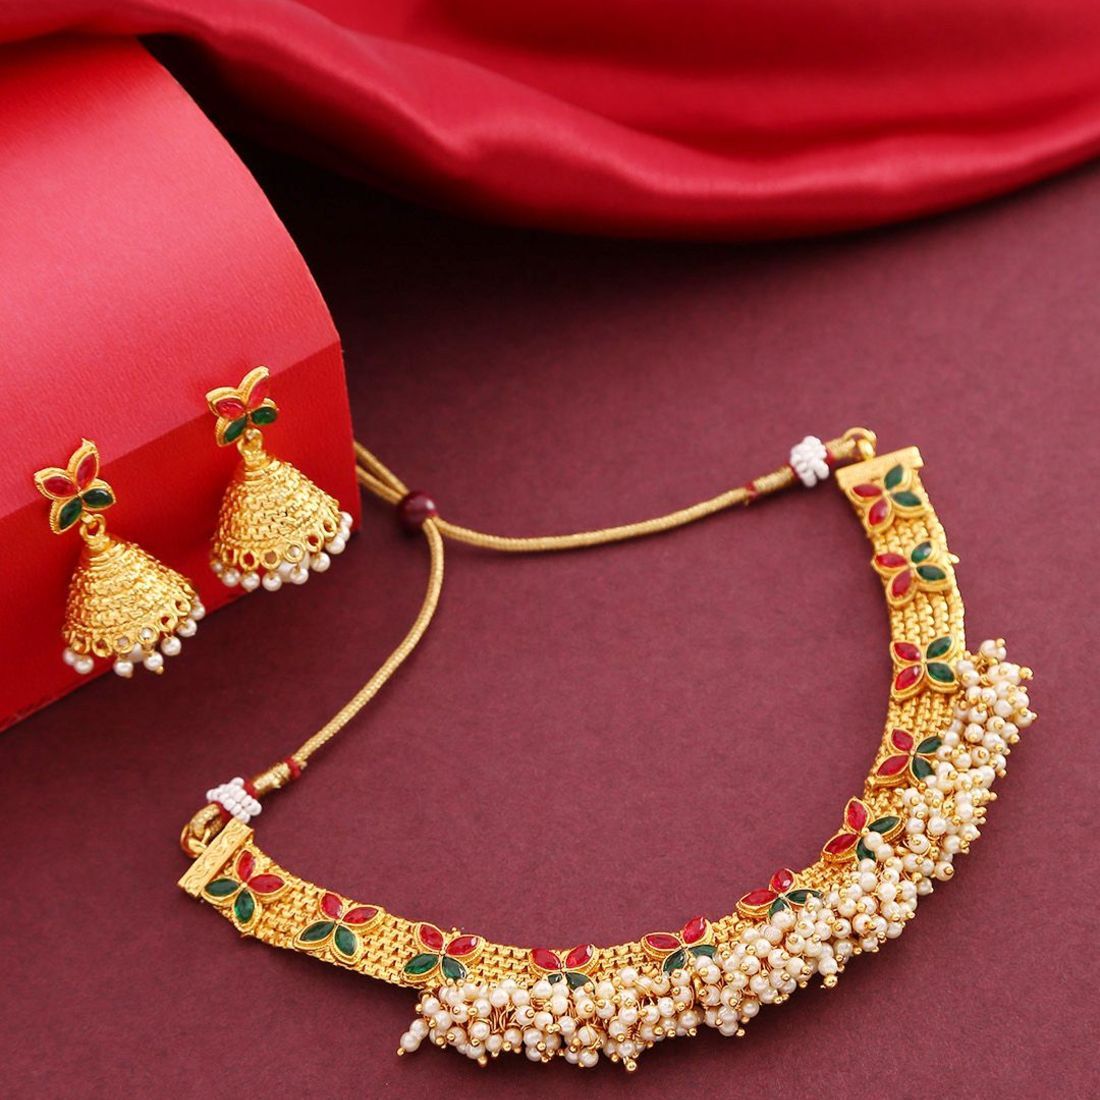 Priyaasi Pink & Green Gold-Plated Stone-Studded & Beaded Handcrafted ...